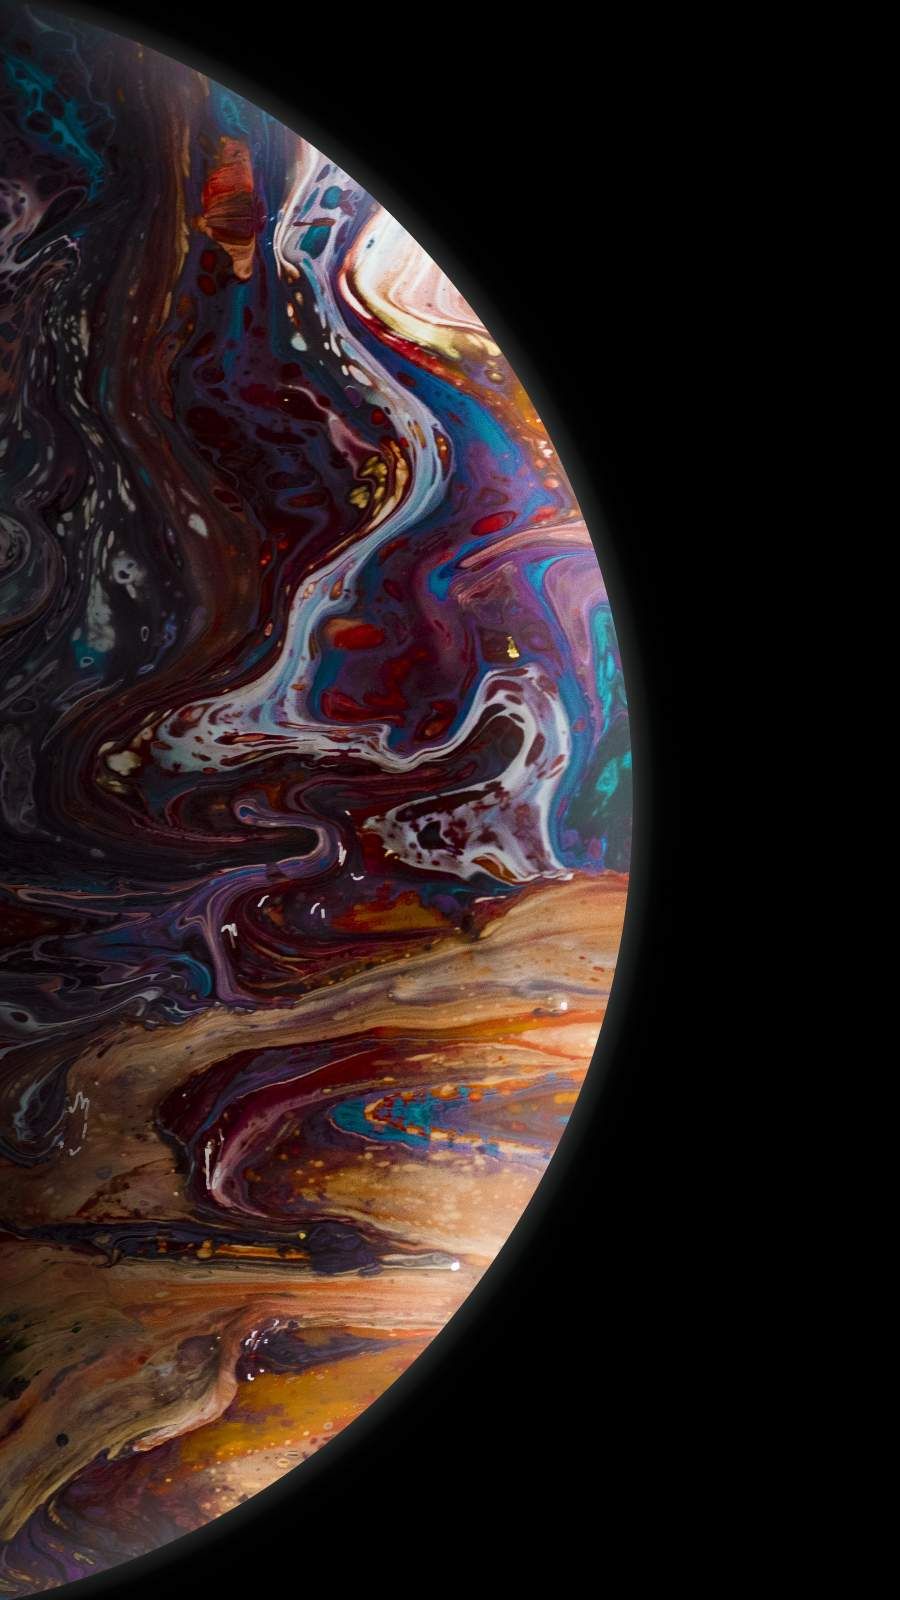 Art of Space iPhone Wallpaper Wallpaper, iPhone Wallpaper. Space iphone wallpaper, iPhone wallpaper planets, iPhone wallpaper earth